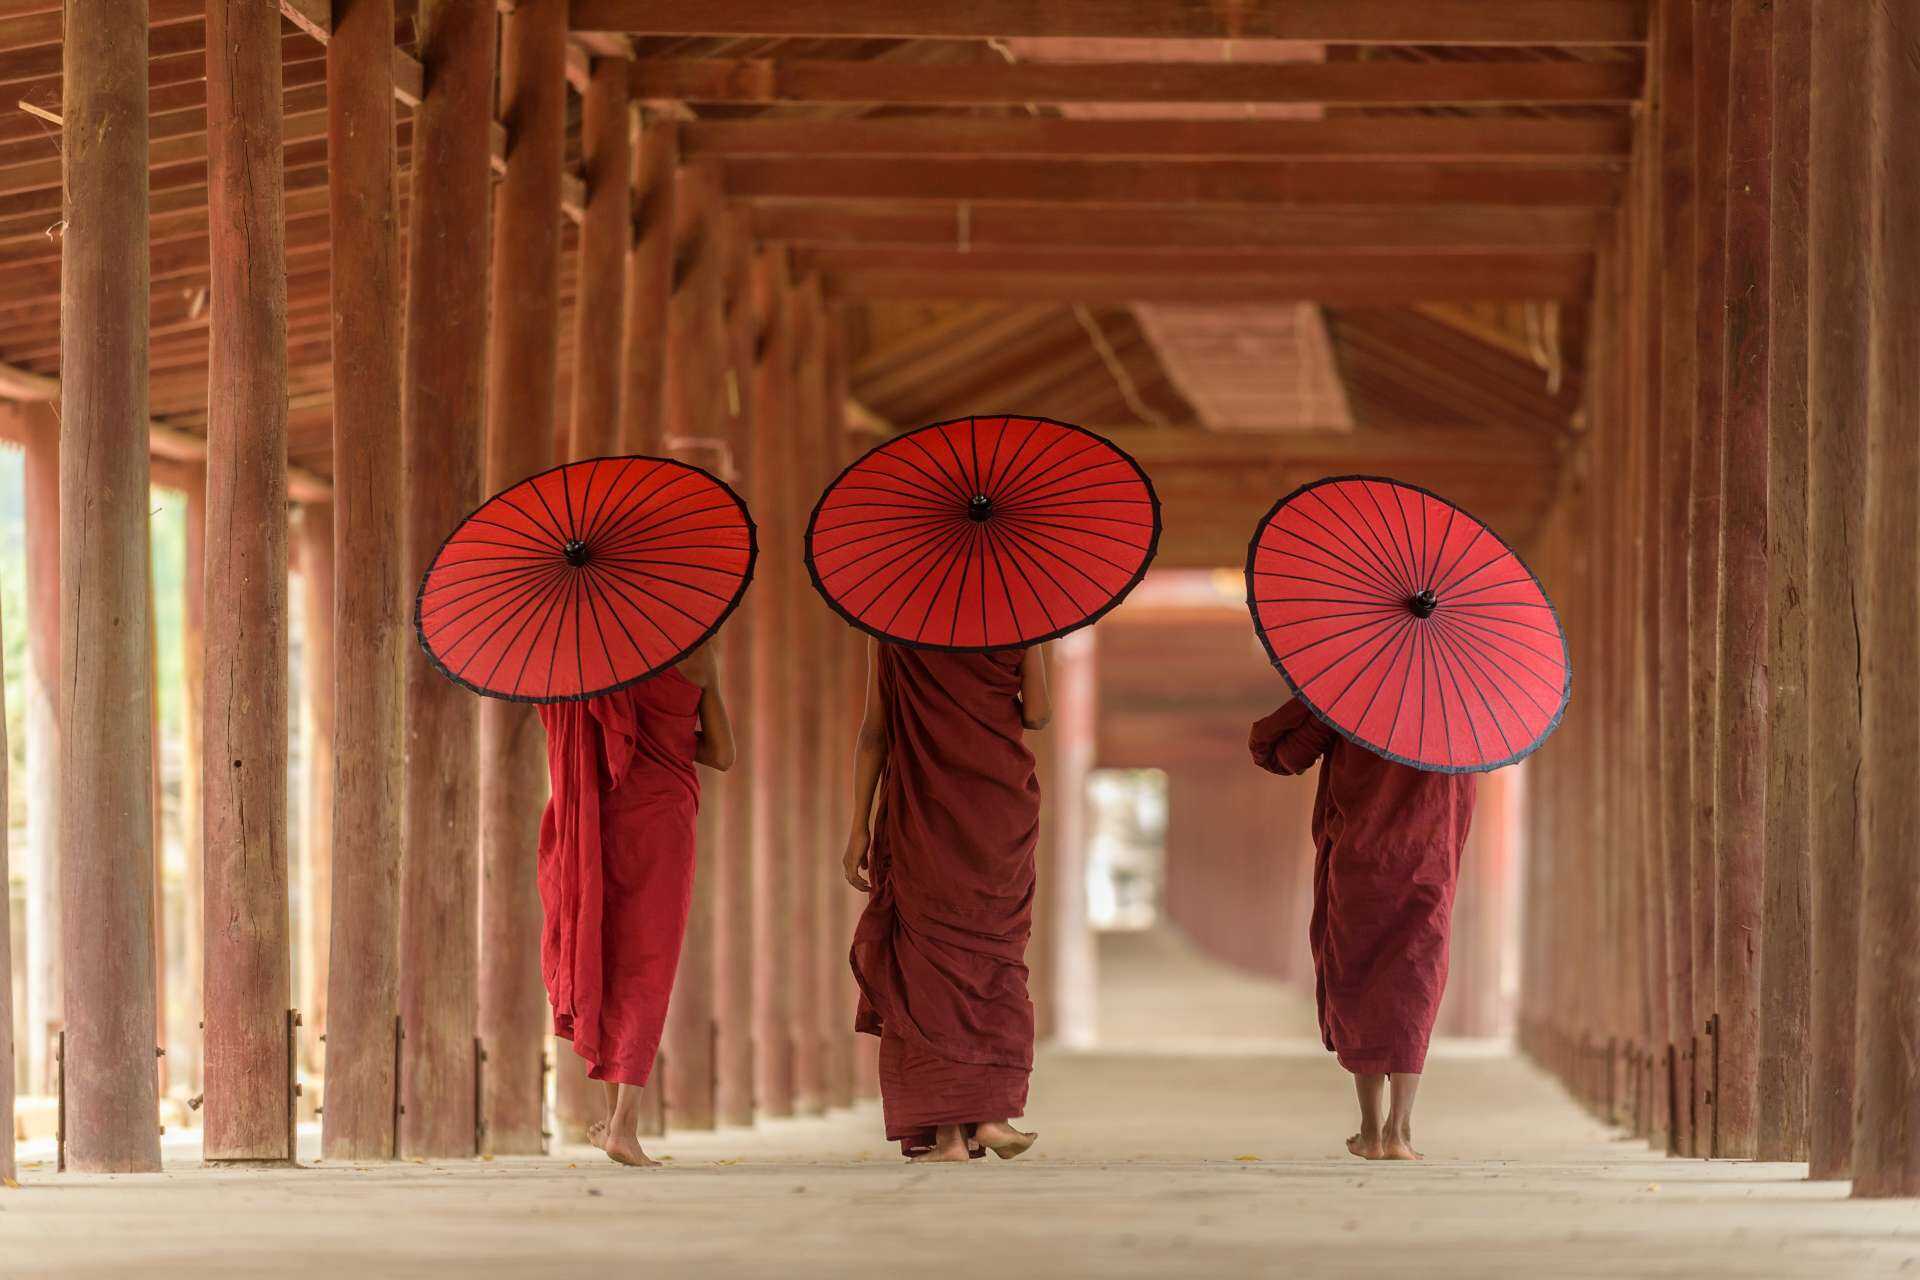 Three monks are walking away from the camera. They wear red robes and carry red parasols.